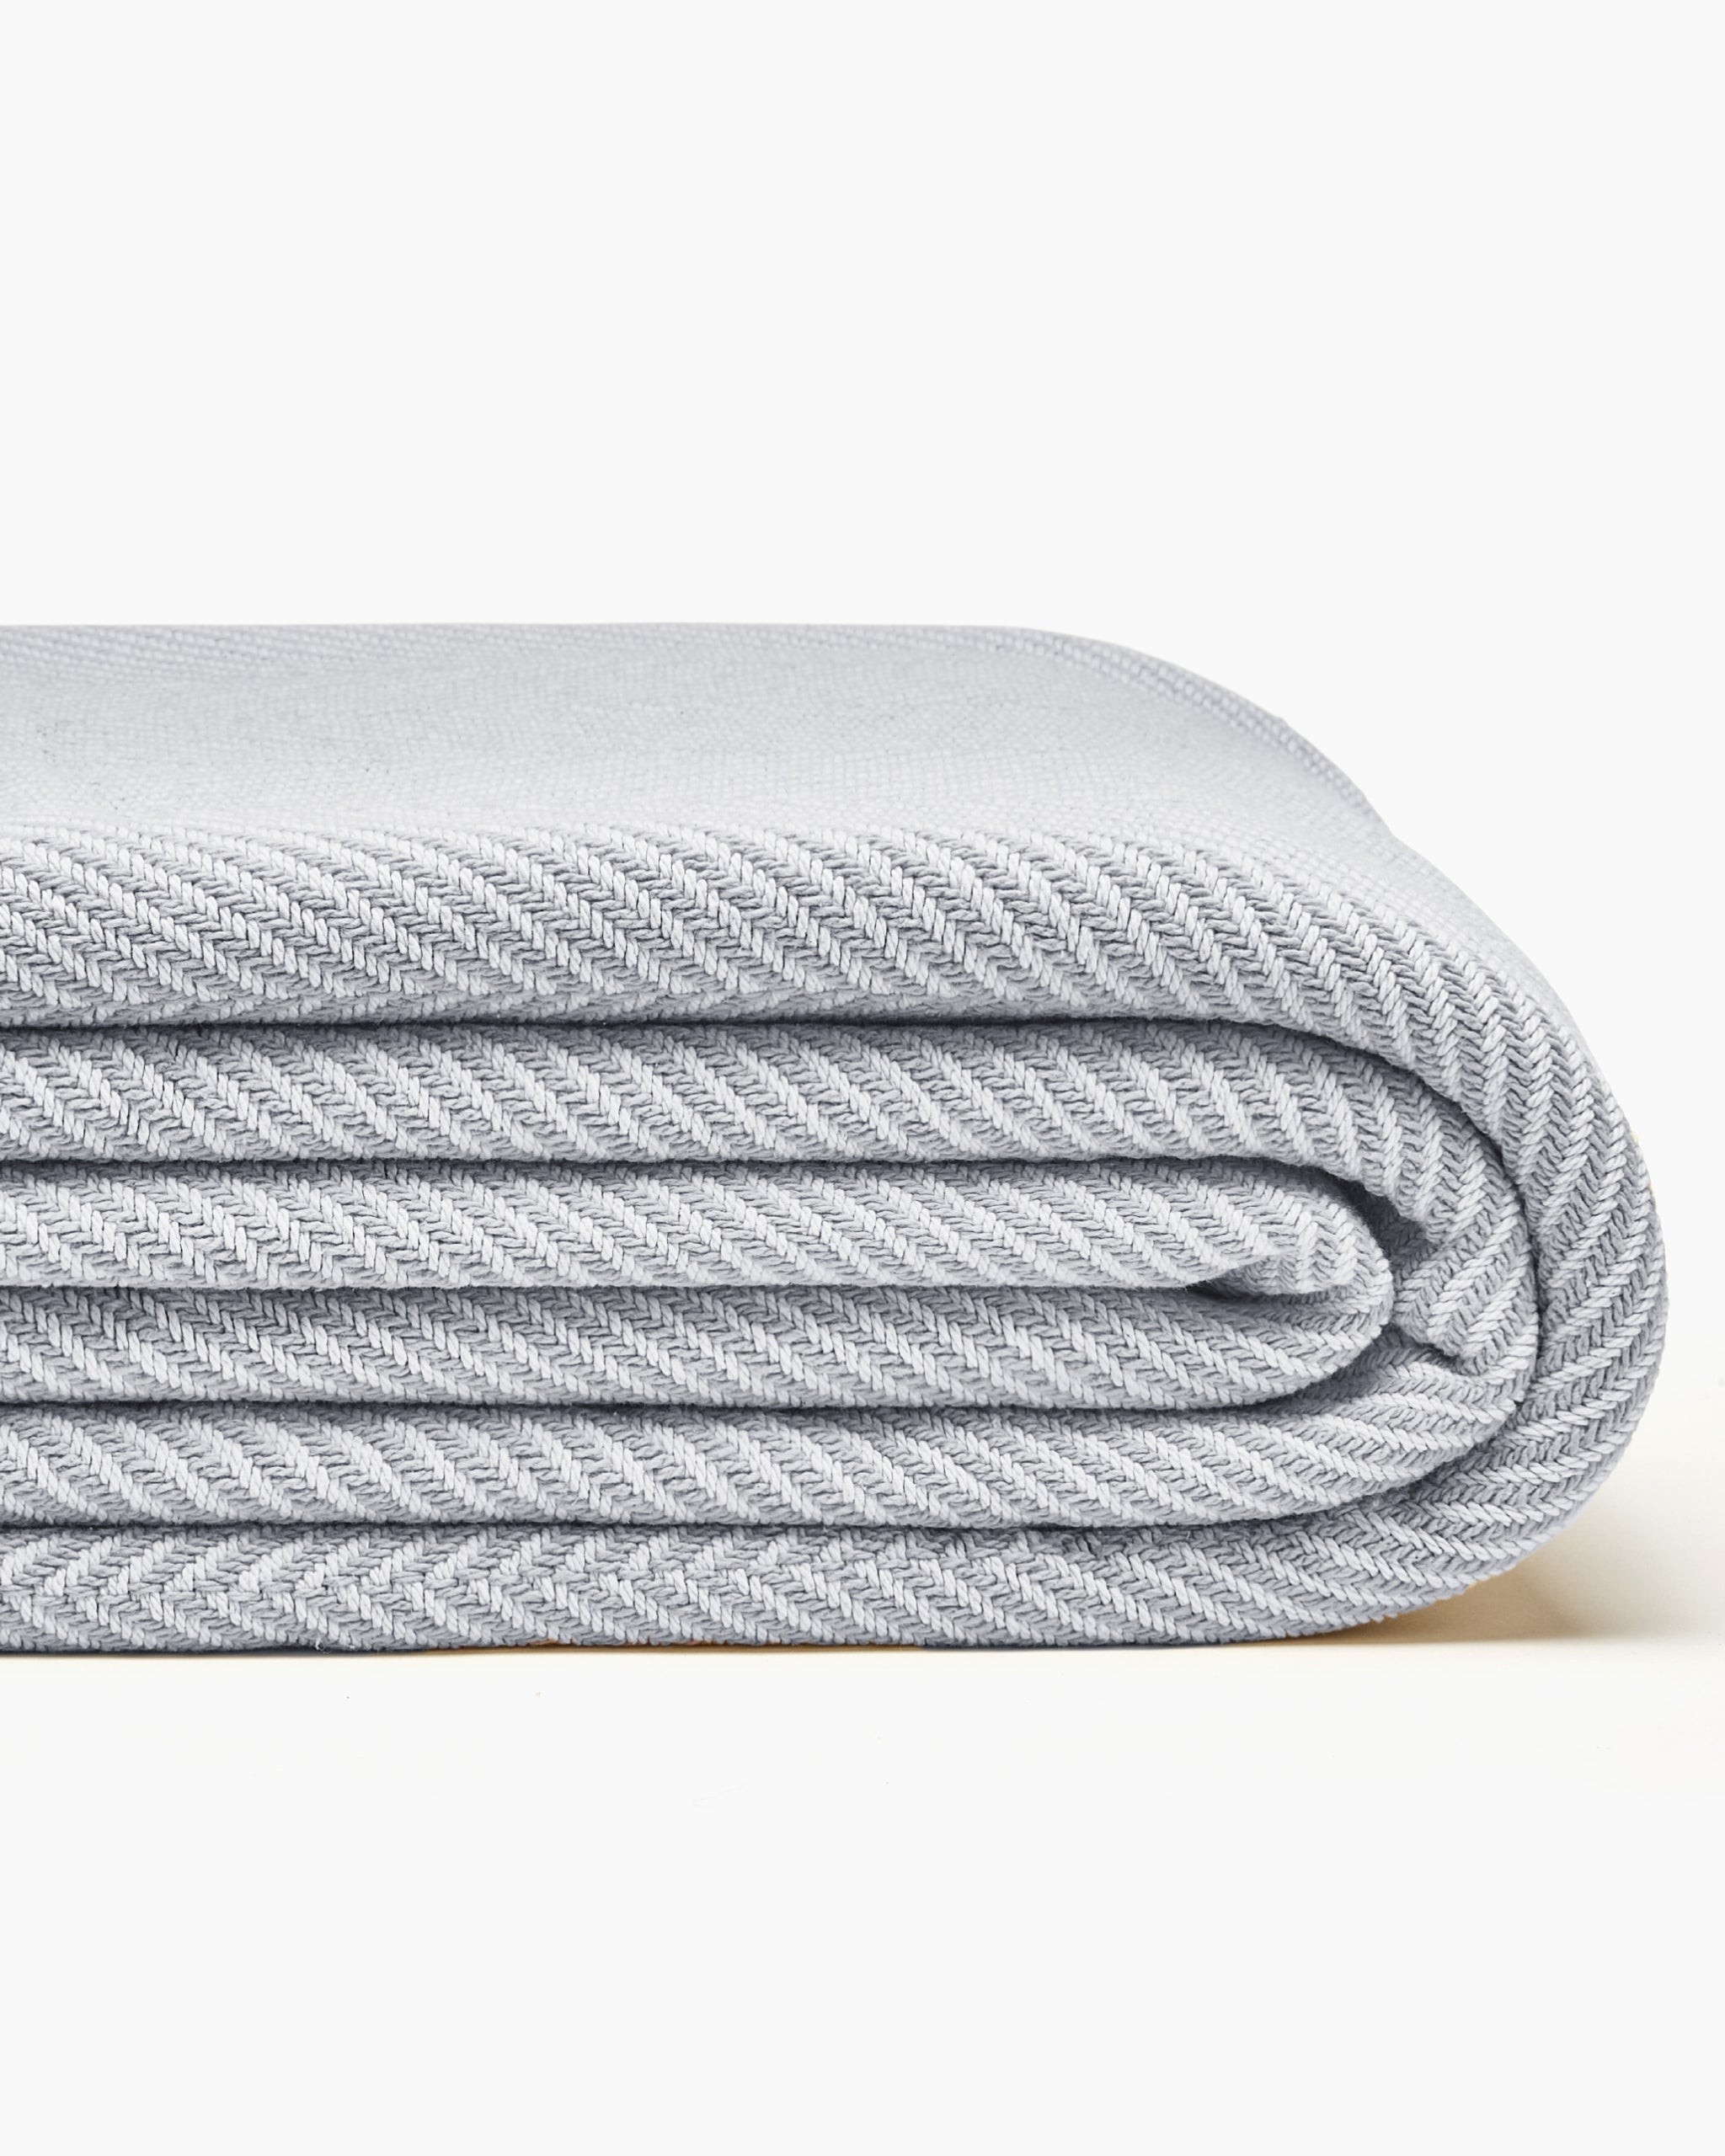 Cascade gray heritage blanket product image